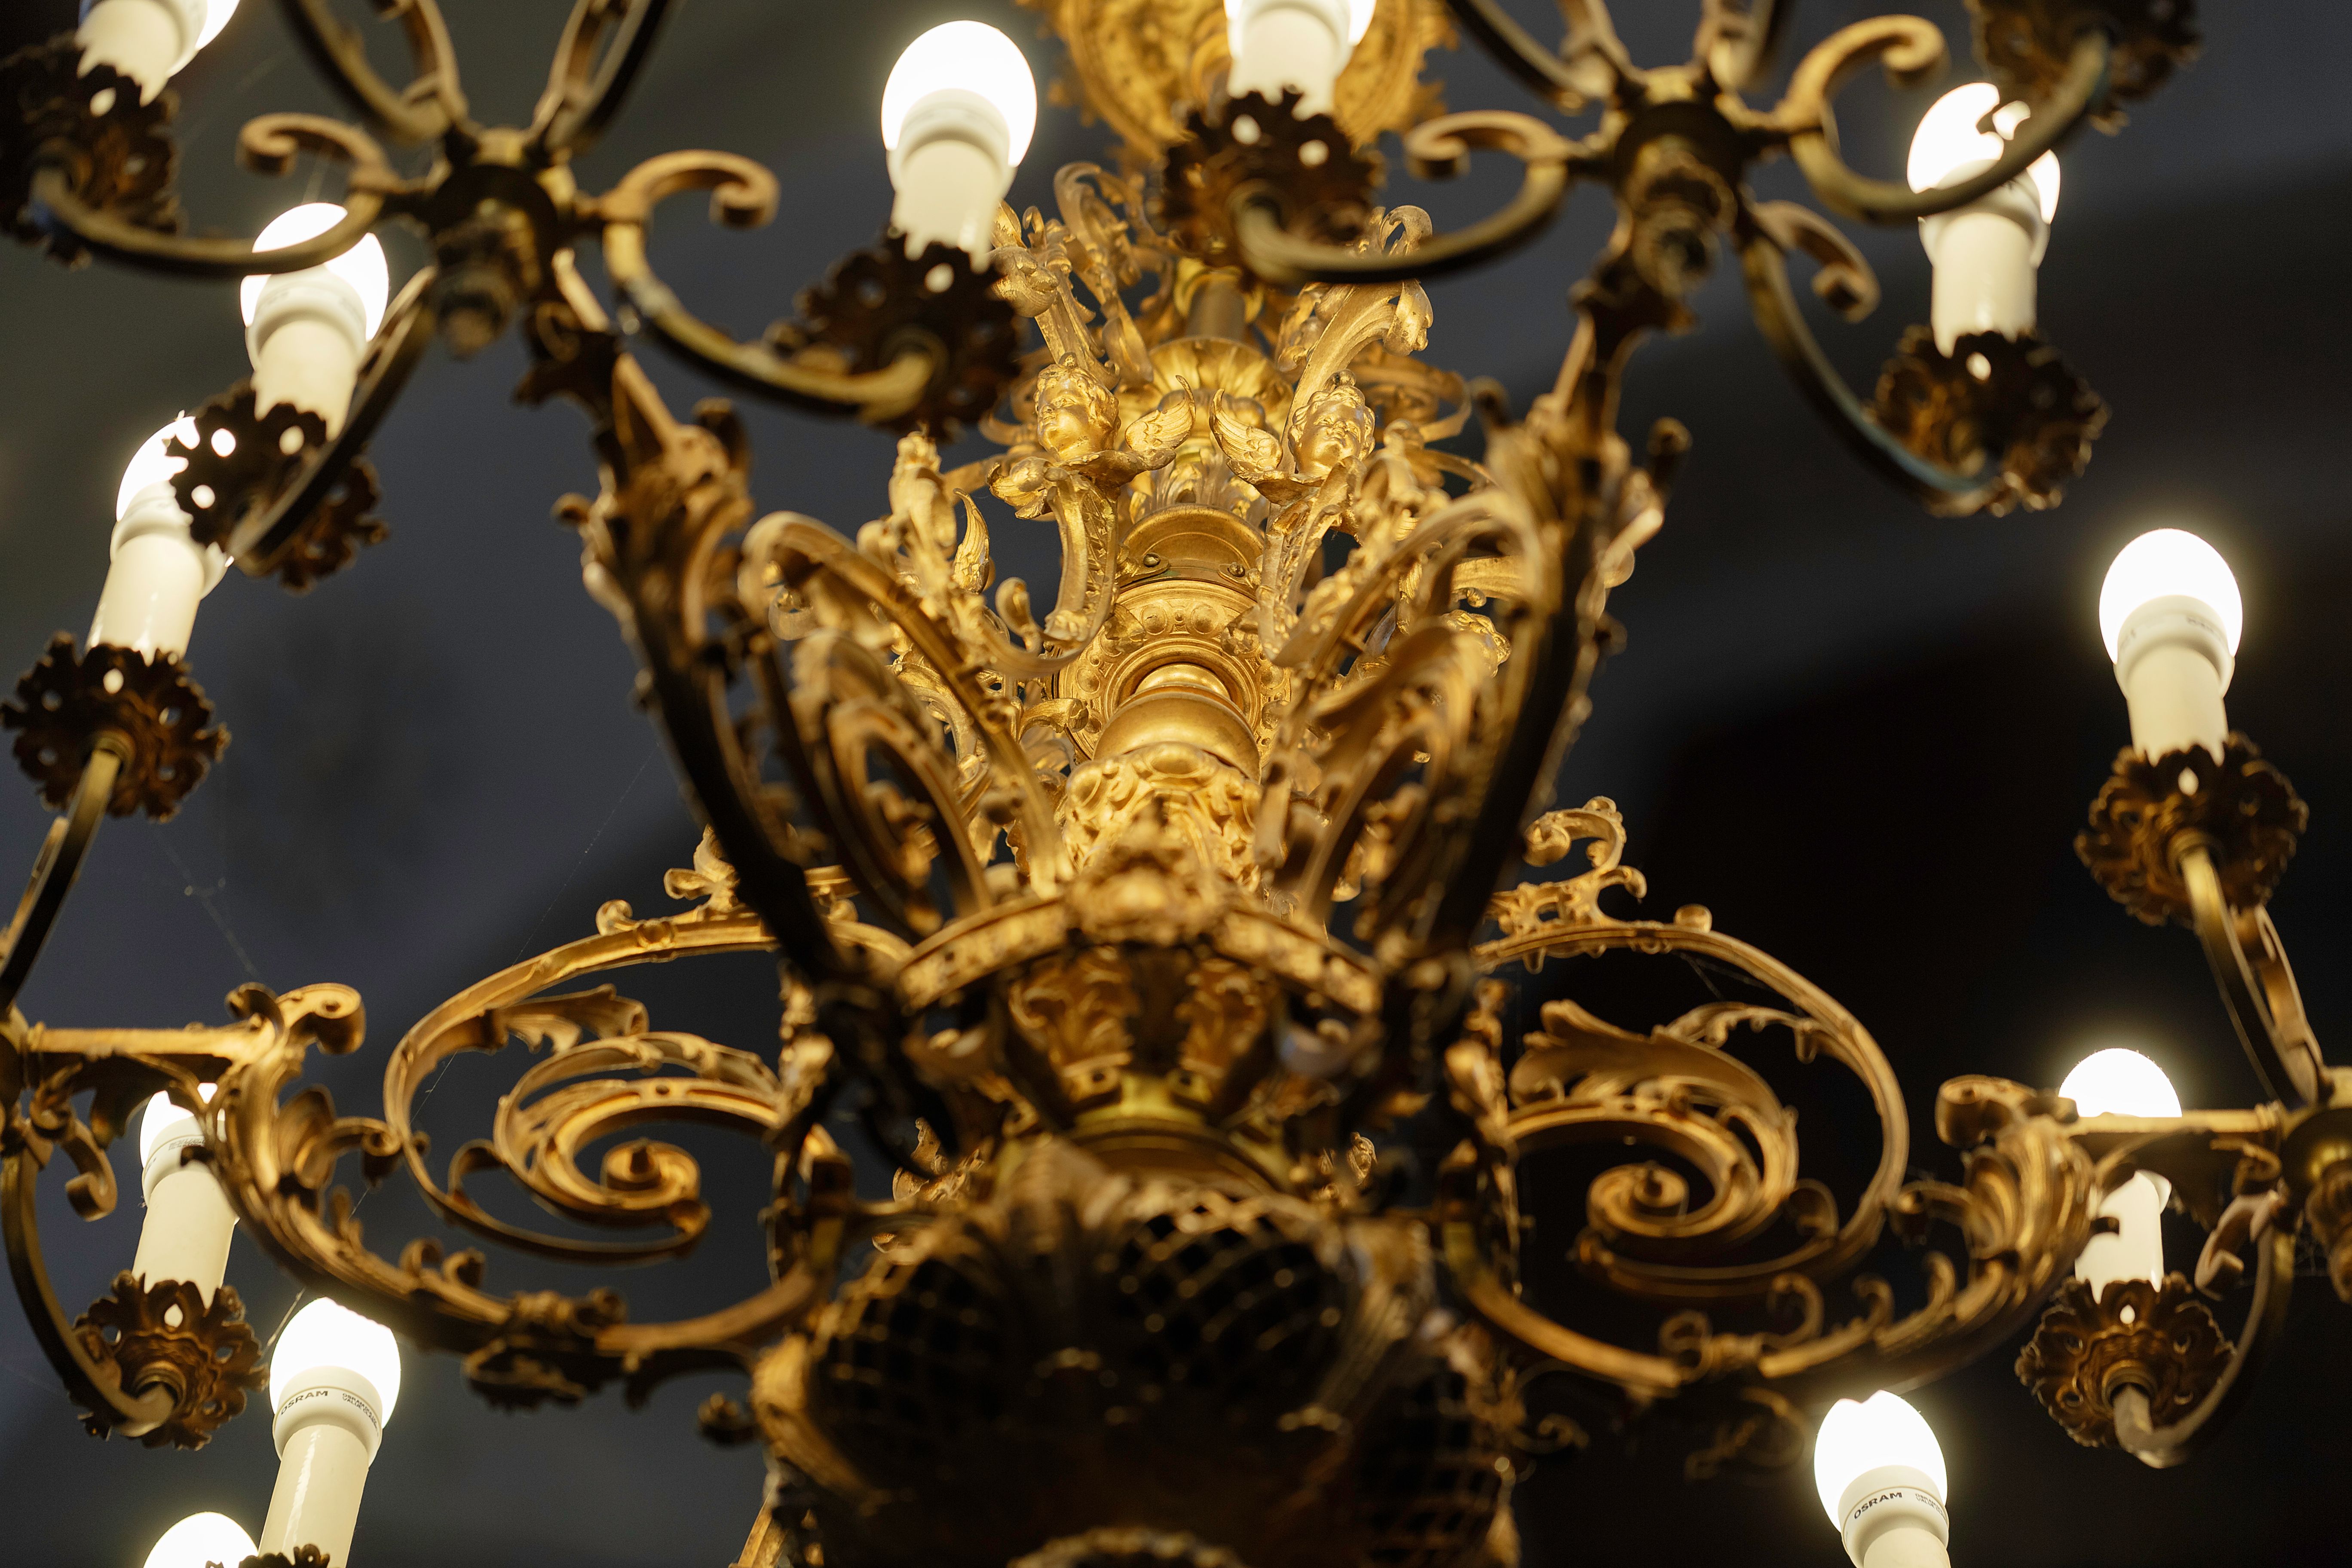 A fragment of the chandelier, the 1880s–1890s, the church of the Holy Cross (Carmelitian) in Kaunas. Photo by Povilas Jarmala, 2019